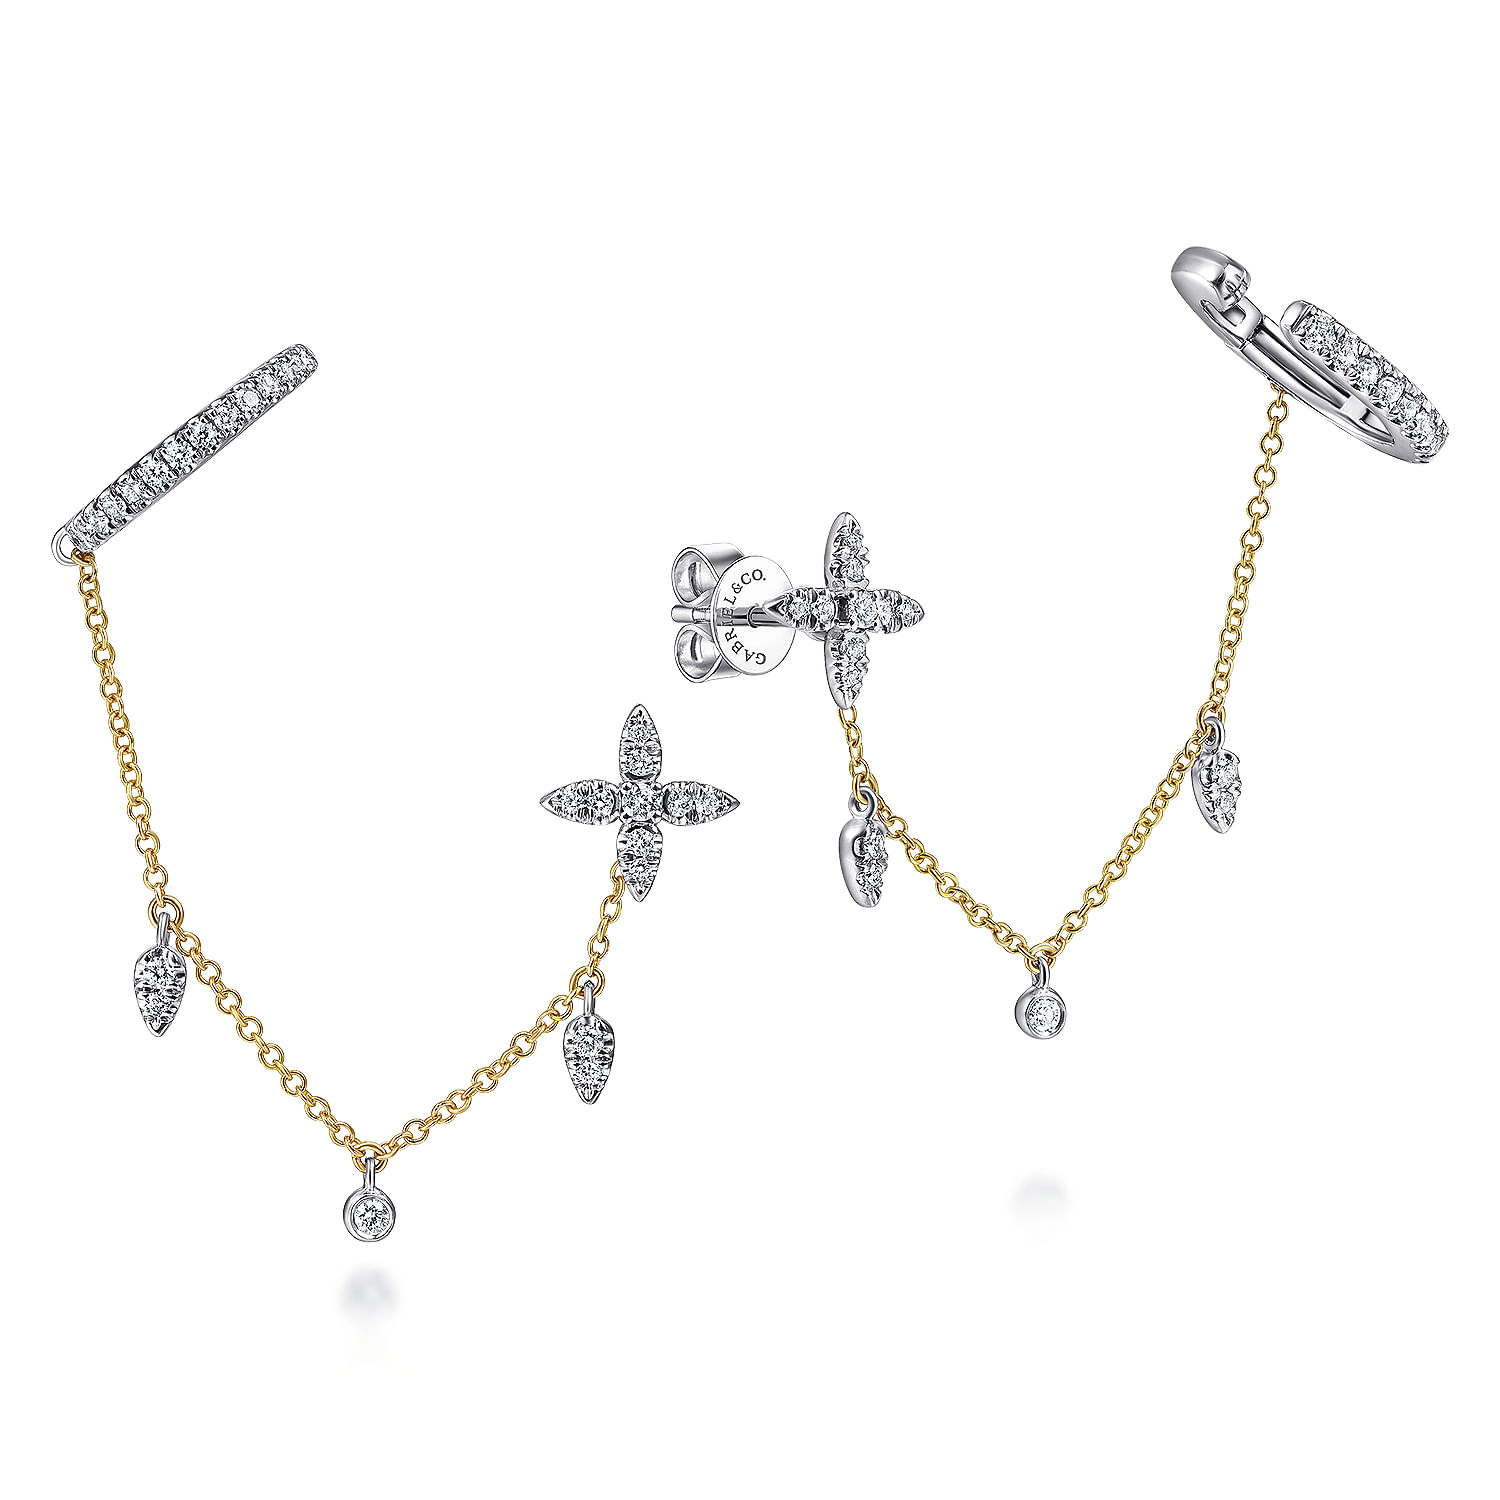 14K Yellow-White Gold Diamond Ear Cuffs and Quatrefoil Chain Earrings with Drops